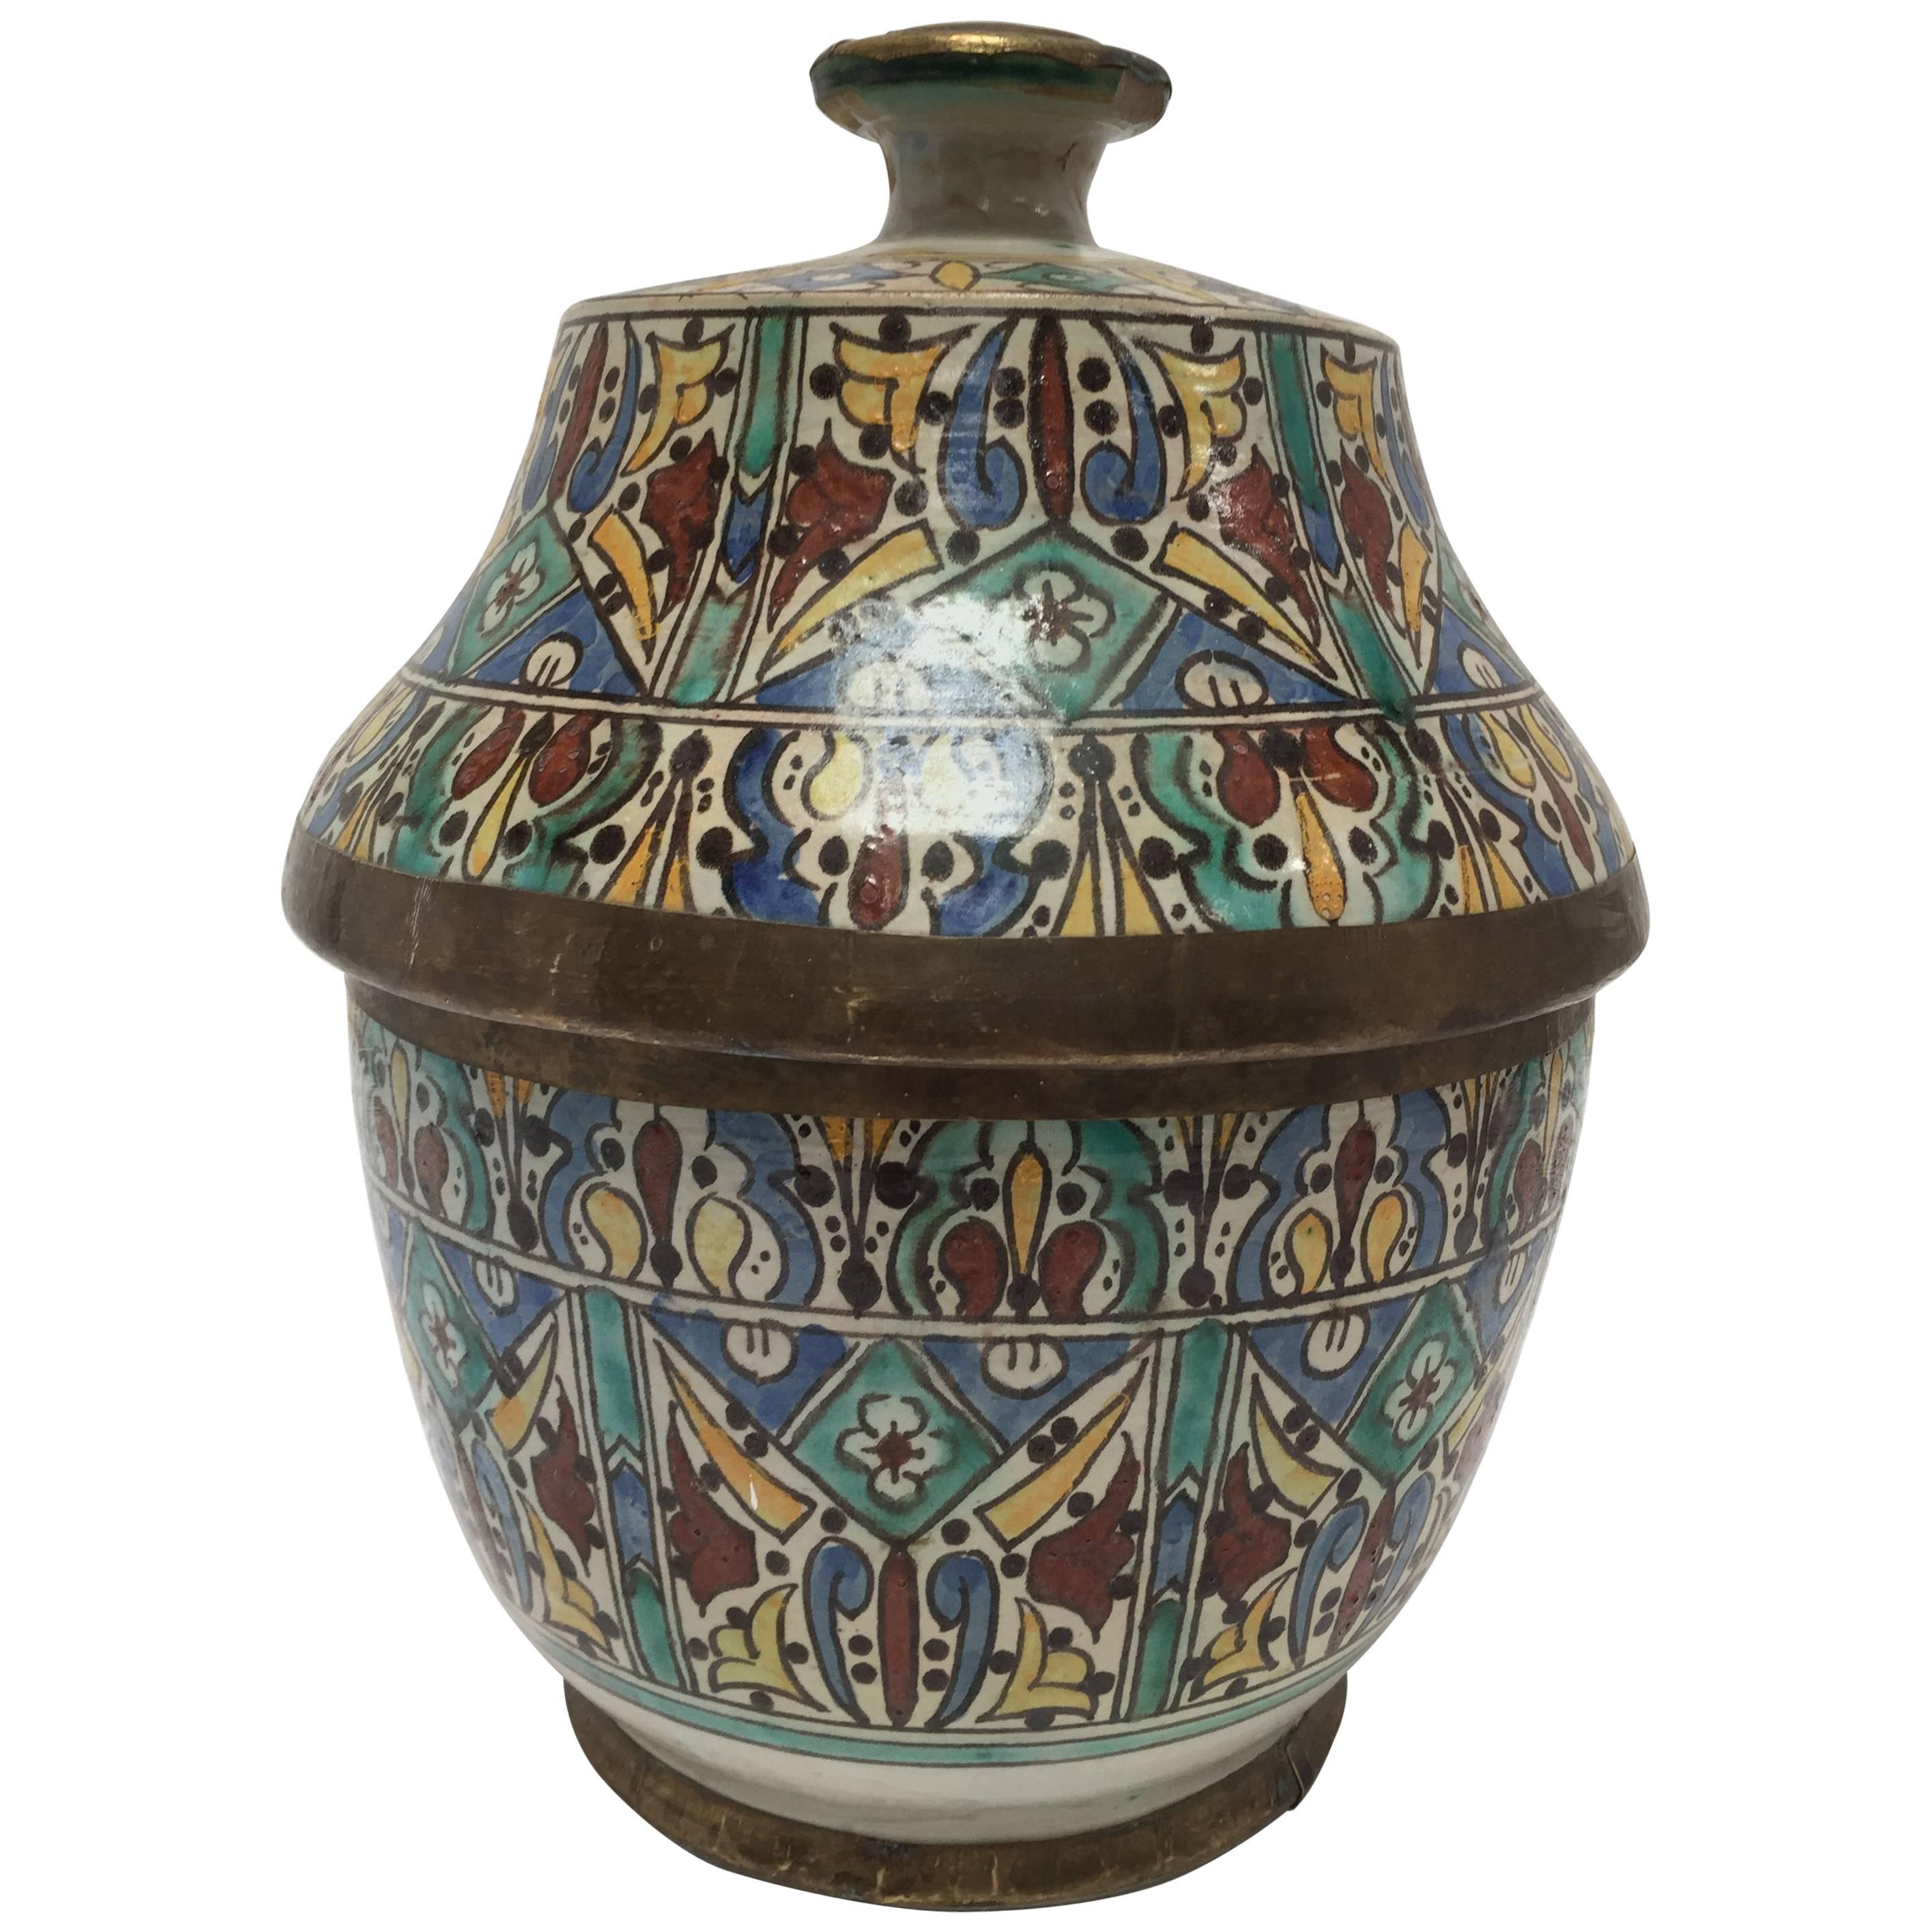 Moorish Ceramic Glazed Jar with Cover Handcrafted in Fez Morocco